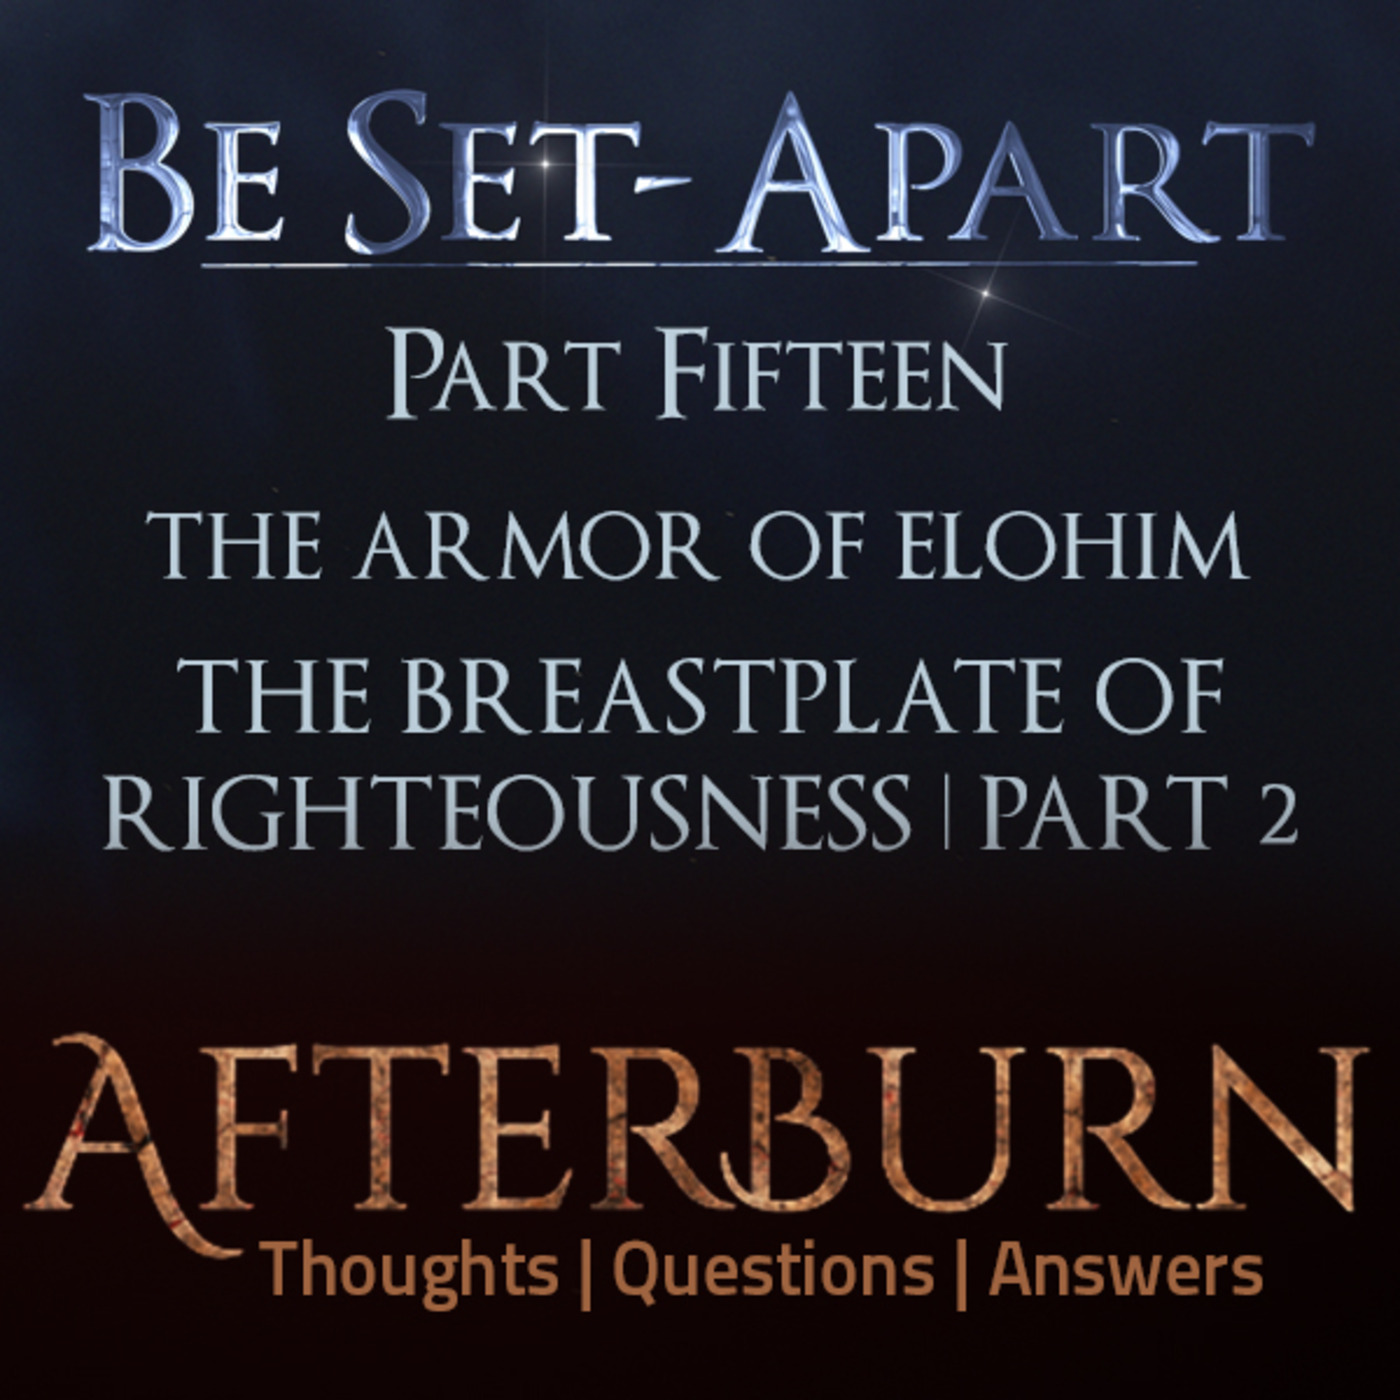 Episode 794: Afterburn | Thoughts, Q&A on Be Set-Apart | Part Fifteen | The Breastplate of Righteousness Part 2